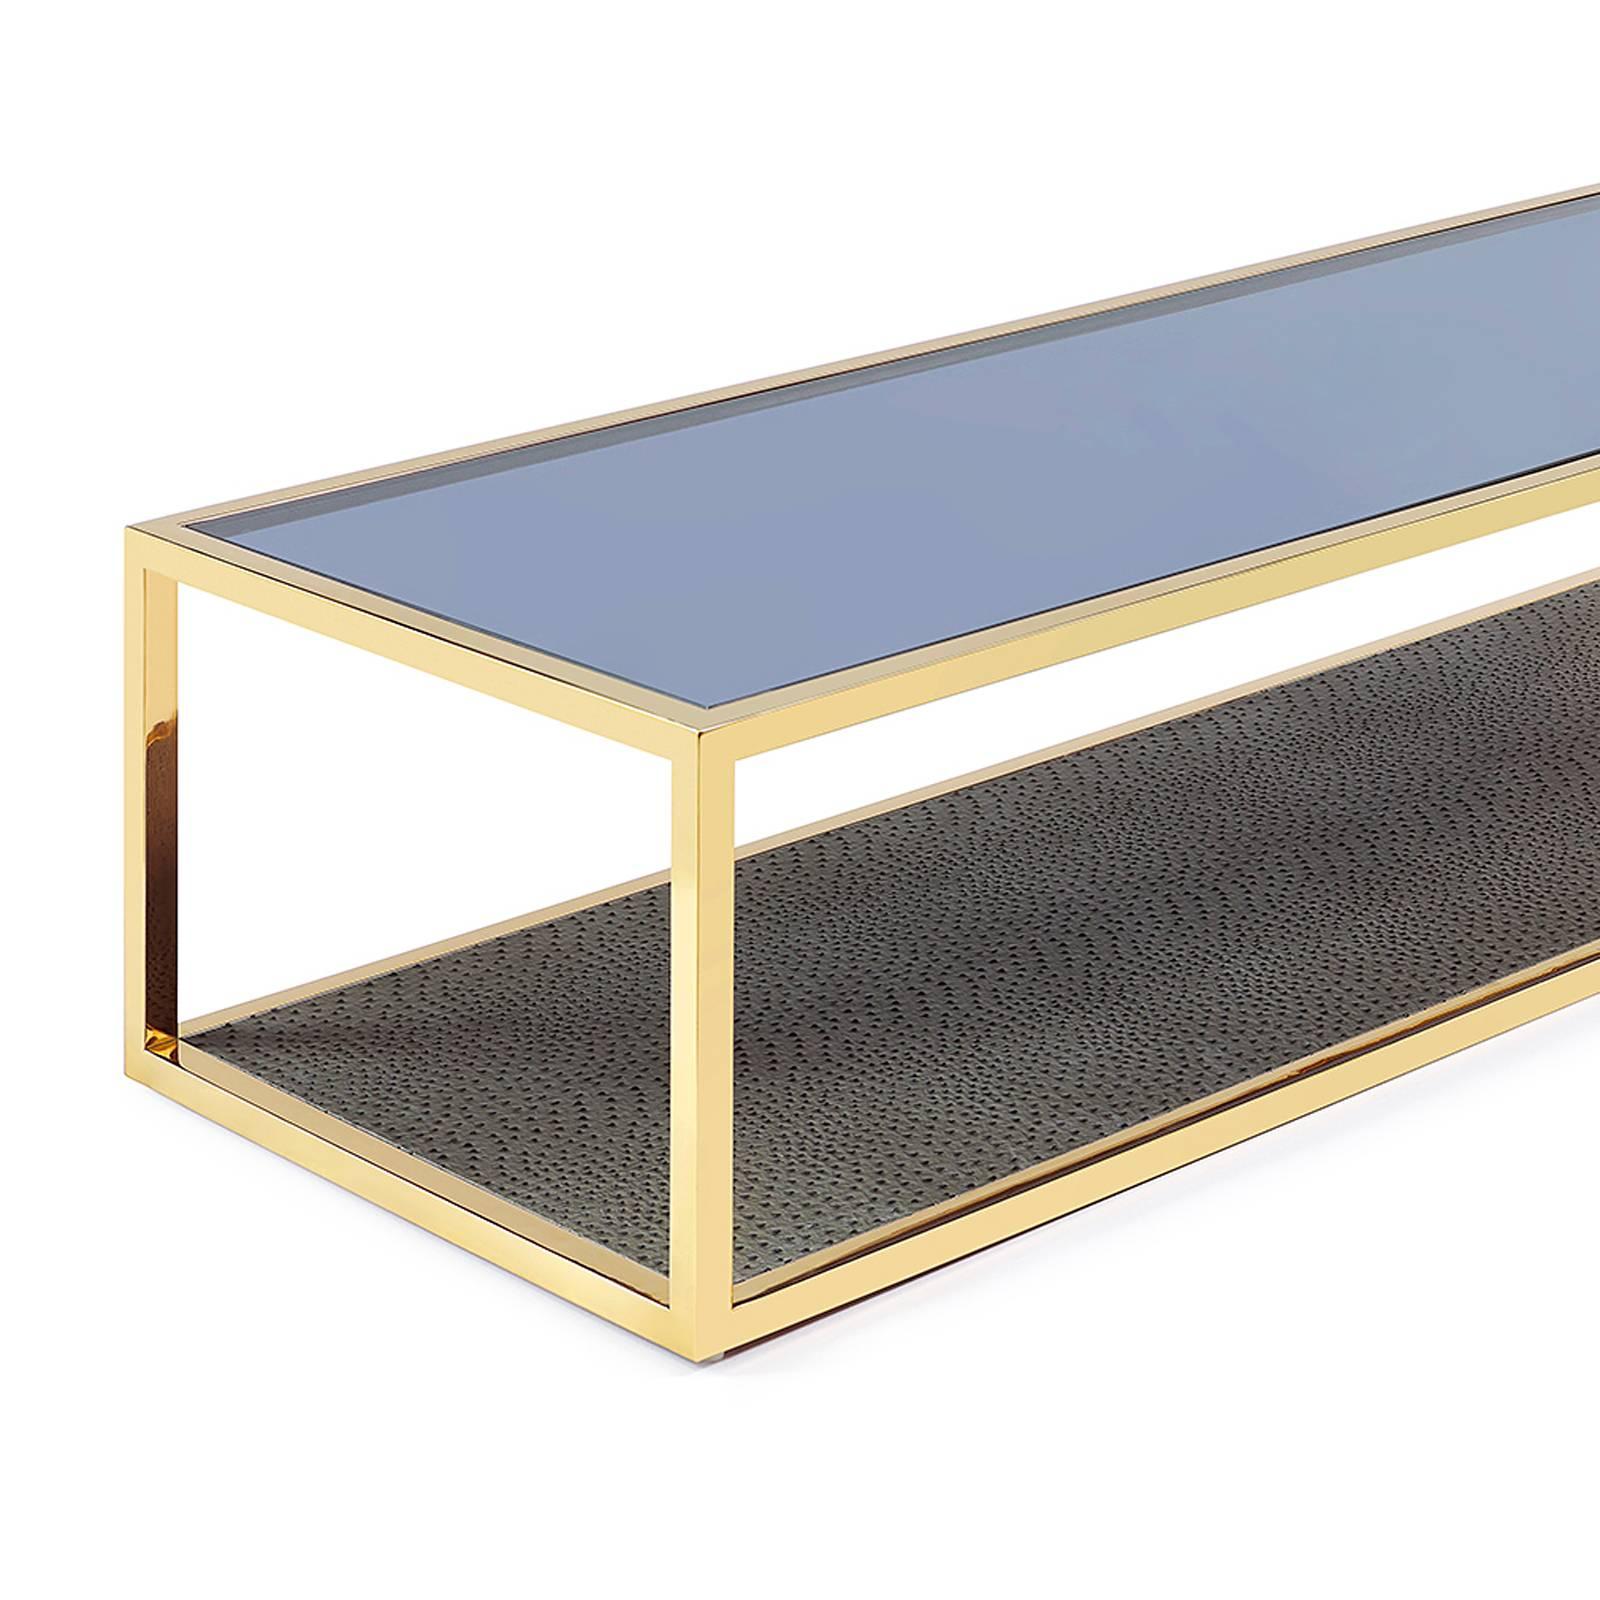 Coffee table Borough with metal gold finish
structure and tempered glass top with down
top in ostrich leather style. Also available in
metal copper finish structure with down top
in ostrich leather style.
